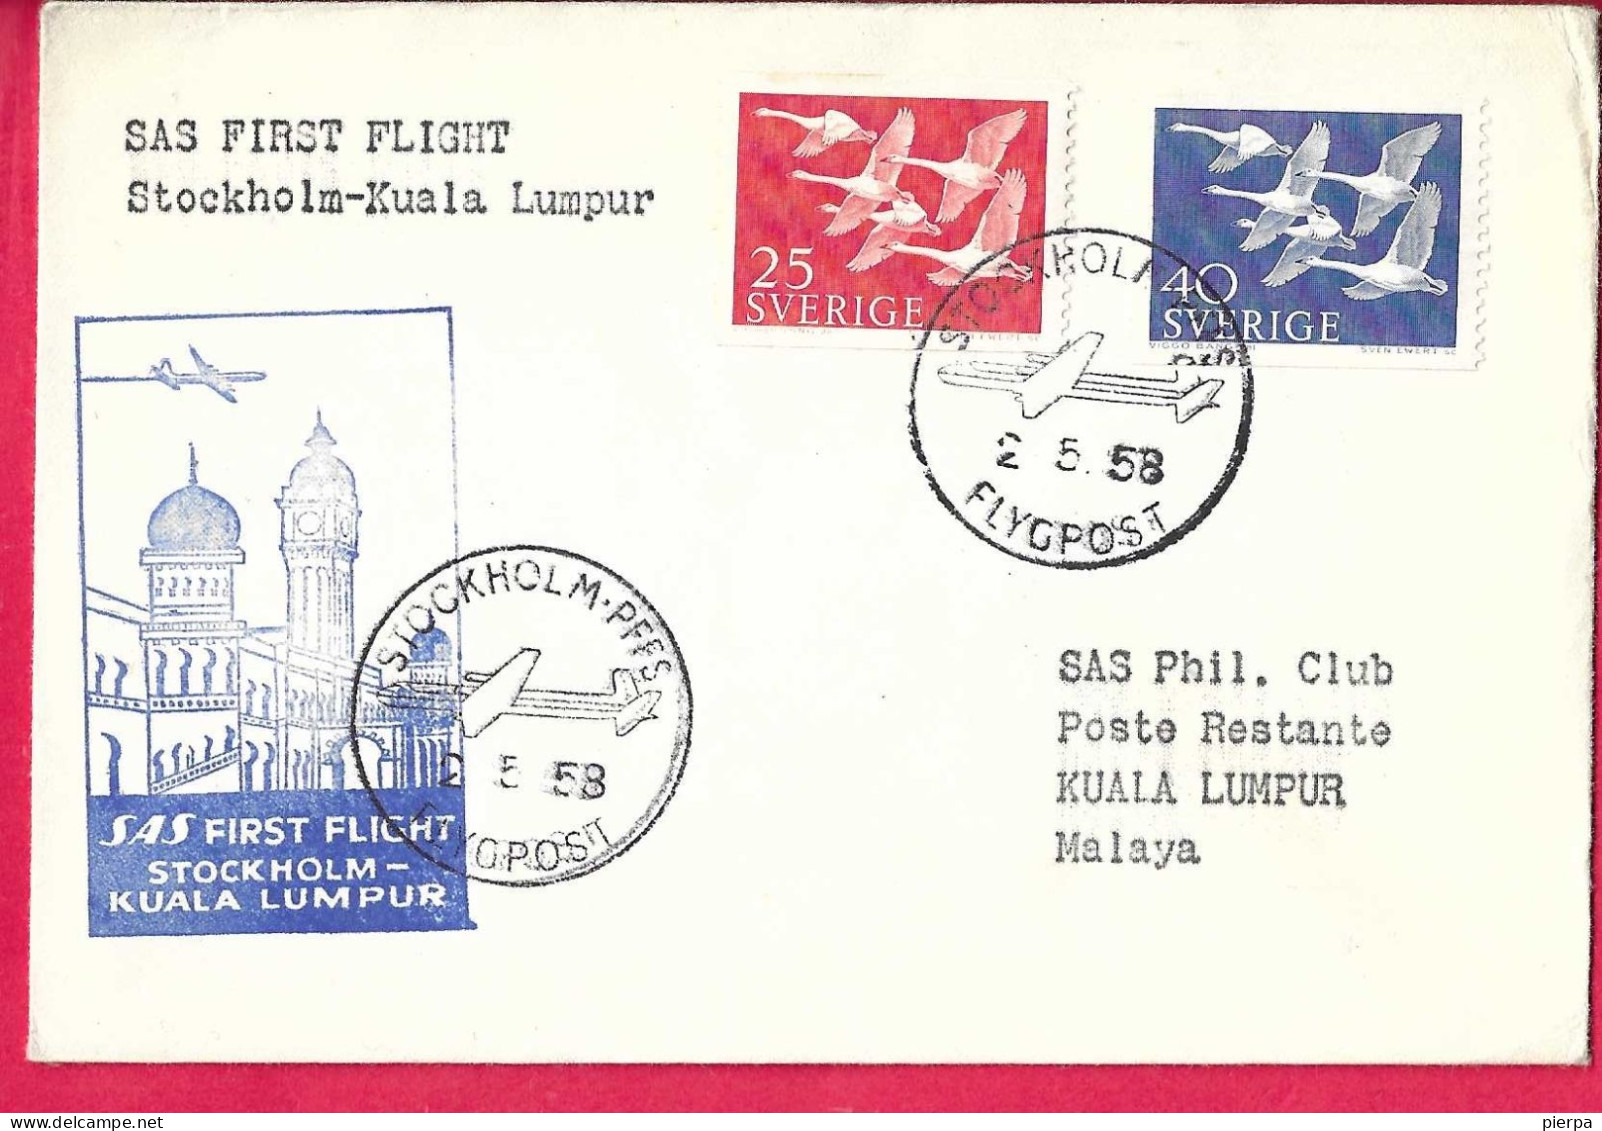 SVERIGE - FIRST FLIGHT S.A.S. FROM STOCKHOLM TO KUALA LUMPUR* 2.5.58* ON OFFICIAL COVER - Lettres & Documents